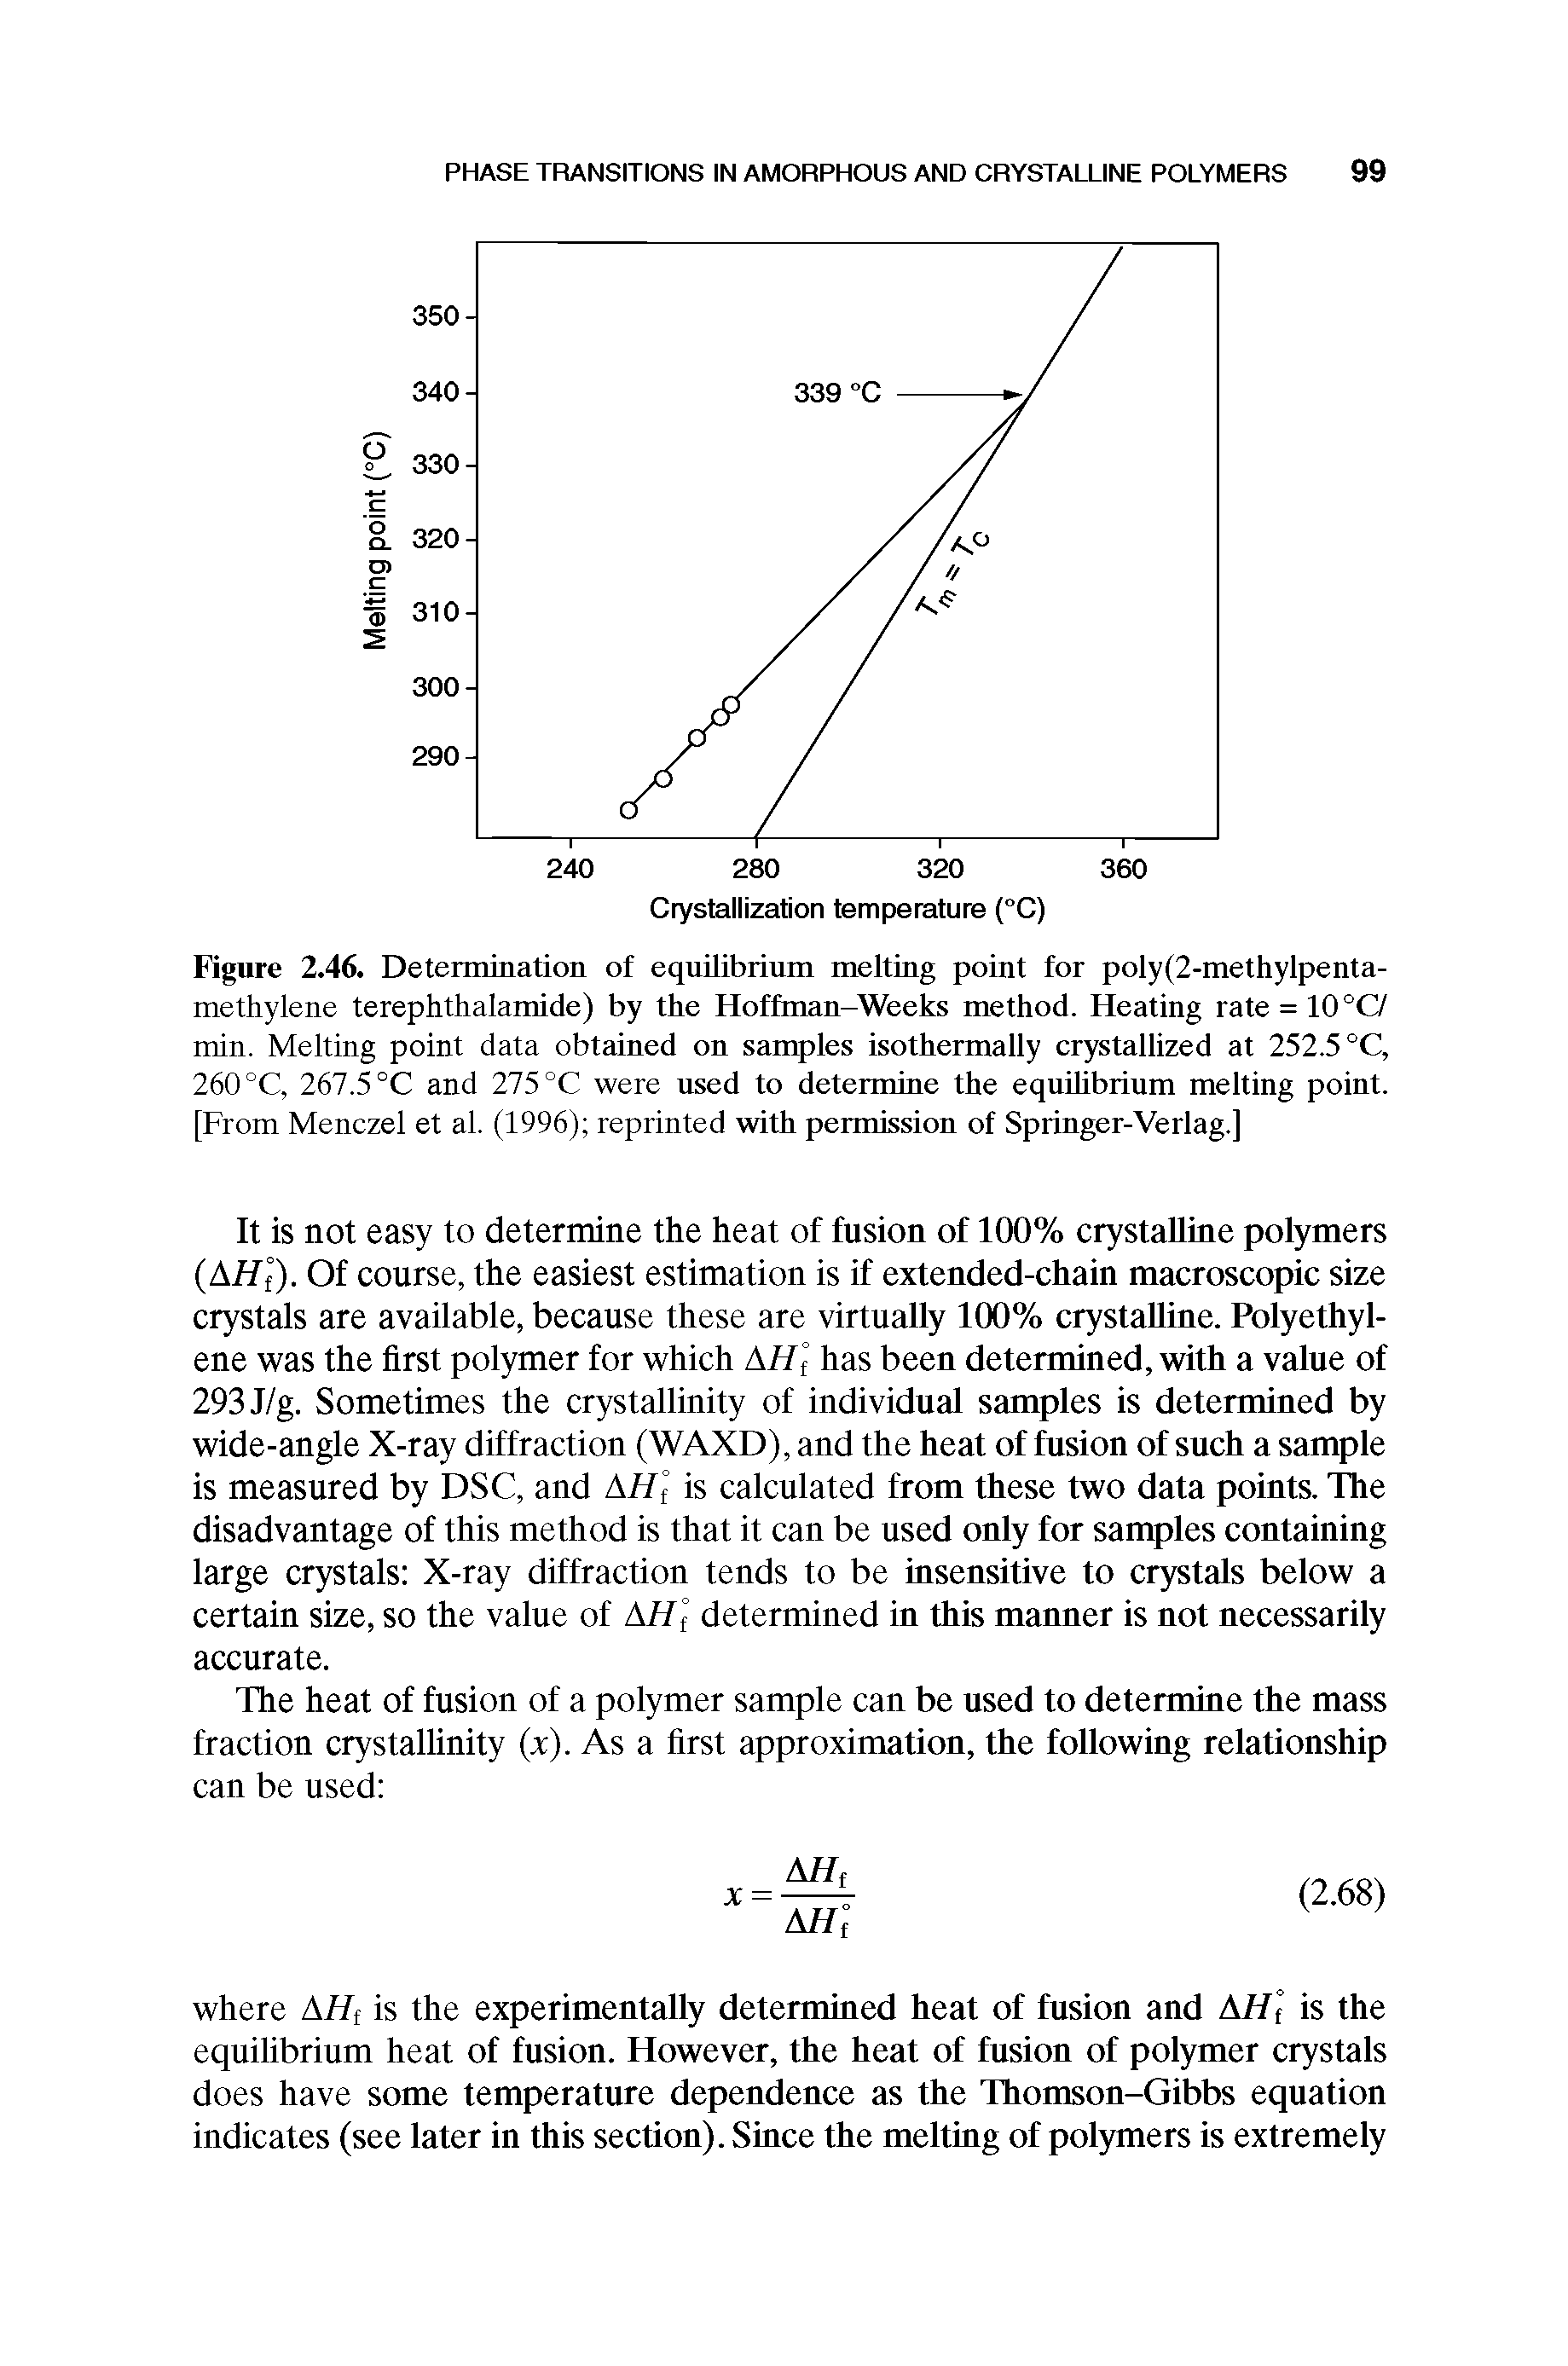 Figure 2.46. Determination of equilibrium melting point for poly(2-methylpenta-methylene terephthalamide) by the Hoffman-Weeks method. Heating rate = 10 °C/ min. Melting point data obtained on samples isothermally crystallized at 252.5 °C, 260 °C, 267.5 °C and 275 °C were used to determine the equihbrium melting point. [From Menczel et al. (1996) reprinted with permission of Springer-Verlag.]...